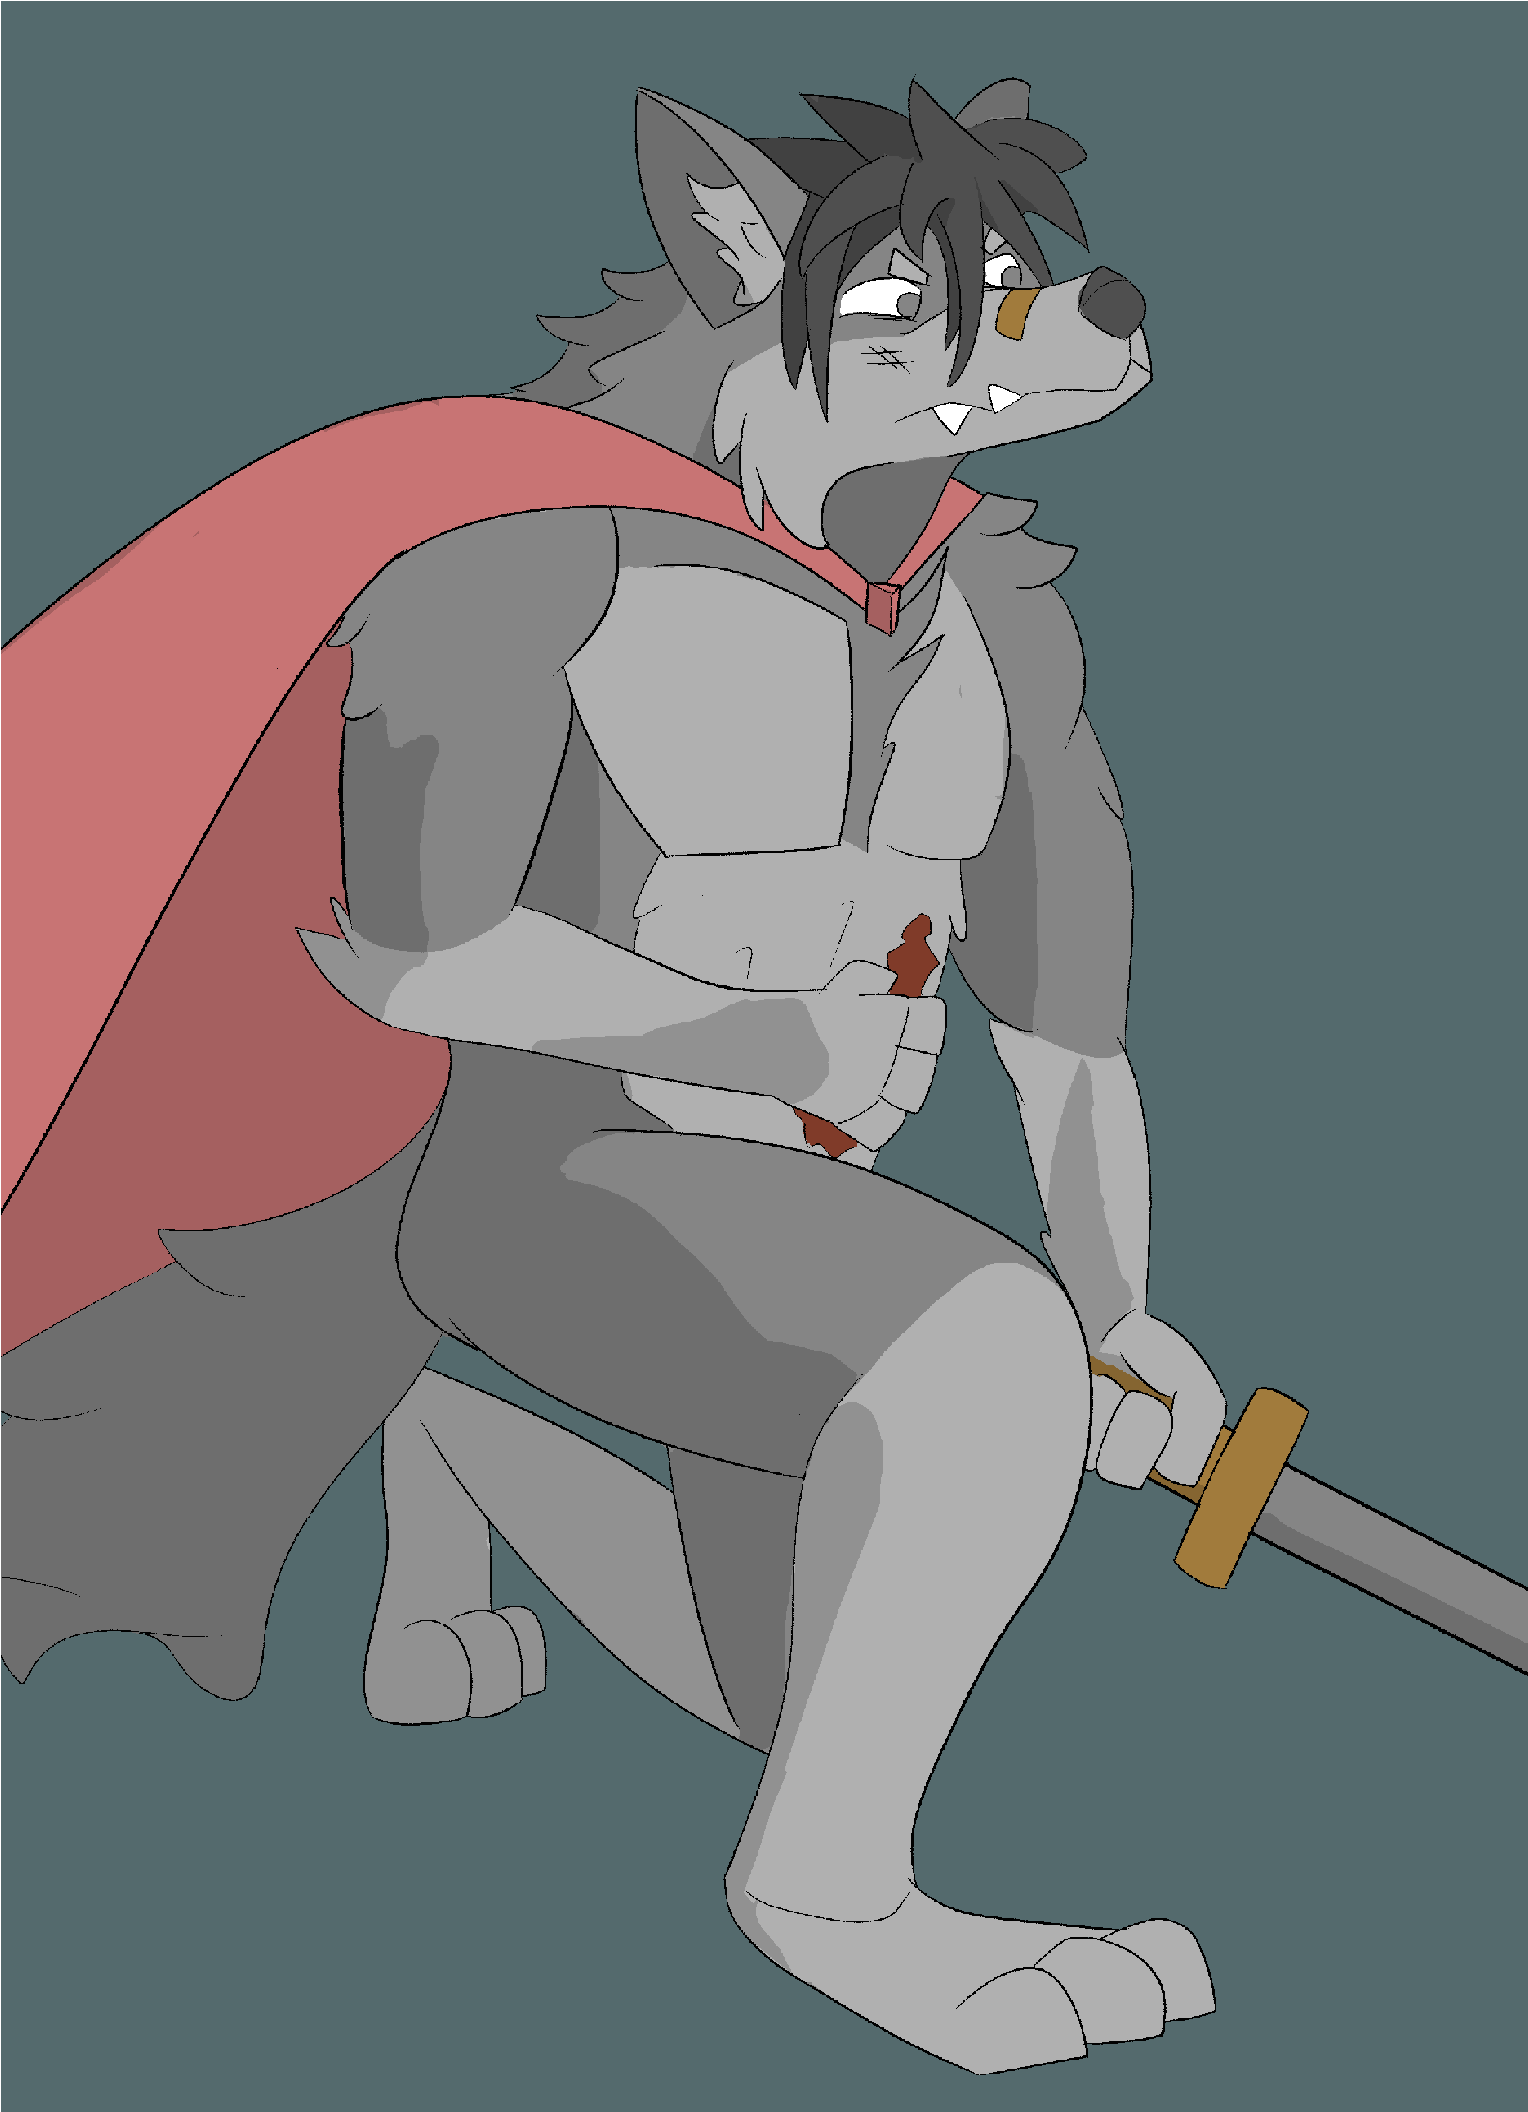 Anthro wolf, clutching a bloody chest wound and holding a sword.